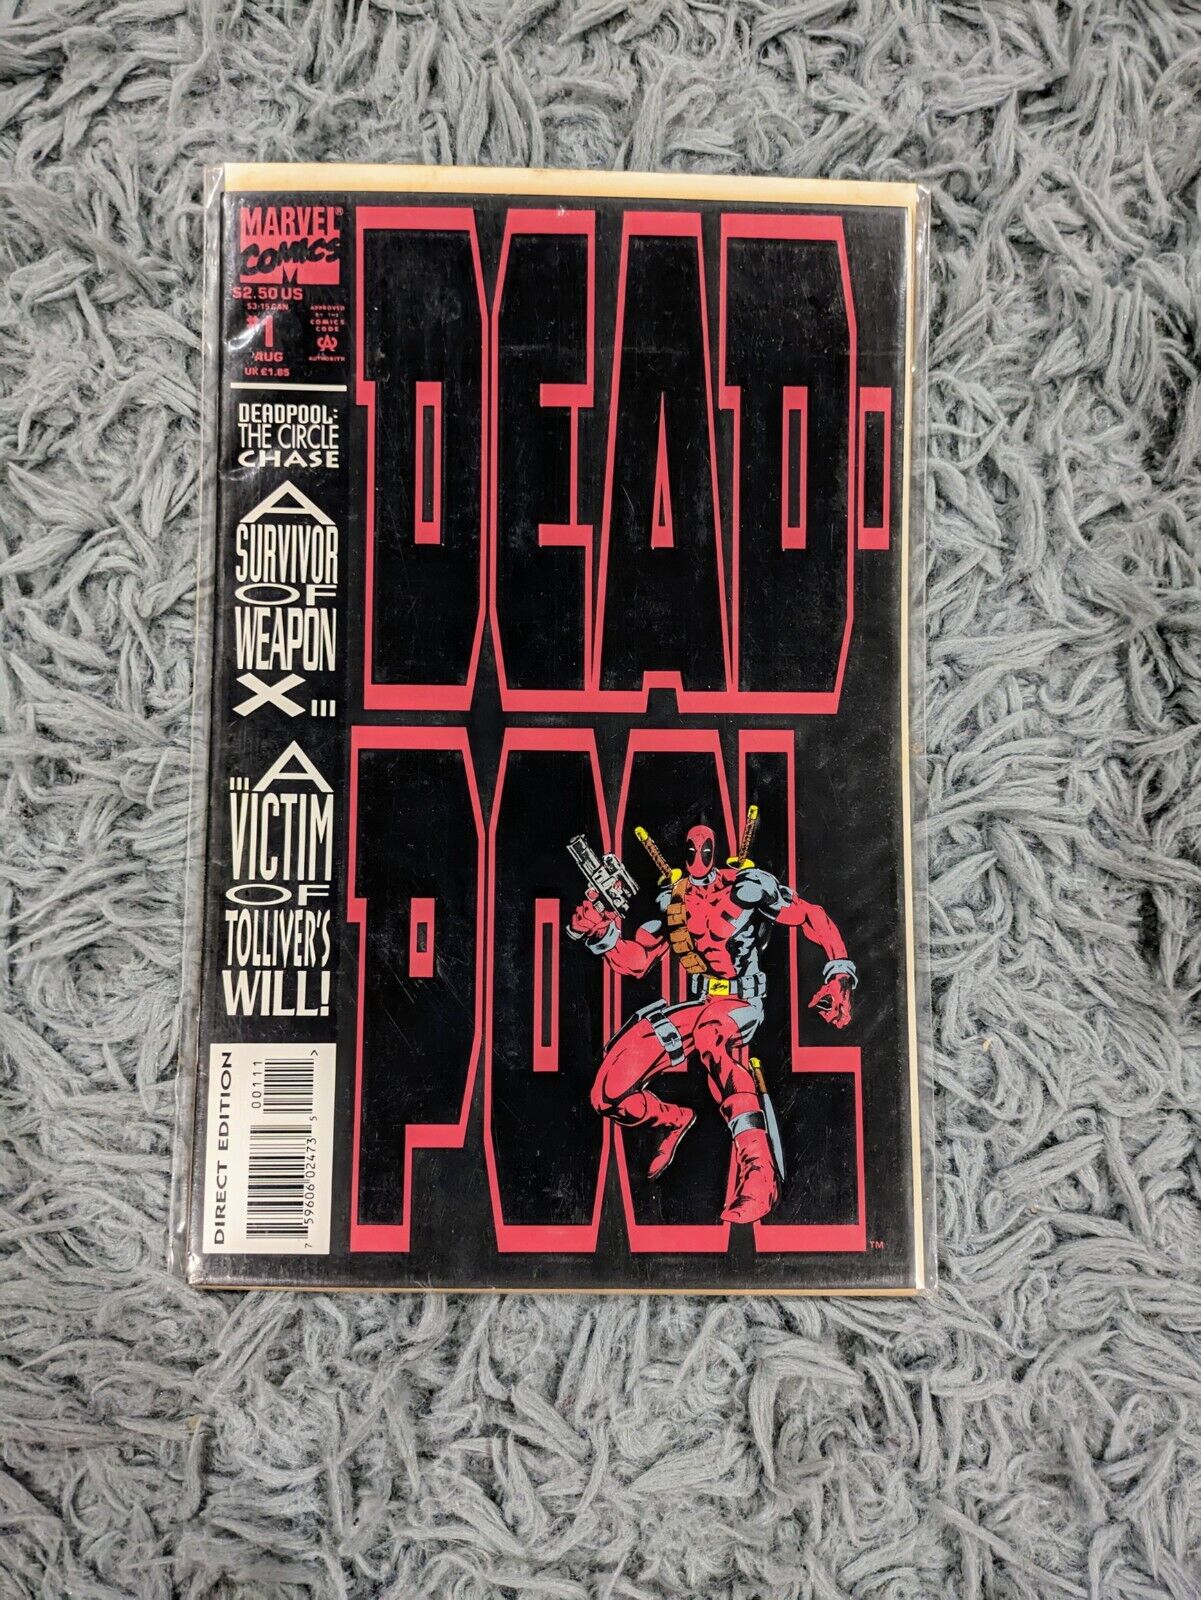 Marvel Comics Deadpool: The Circle Chase 1993 Issue #1 Comic Book